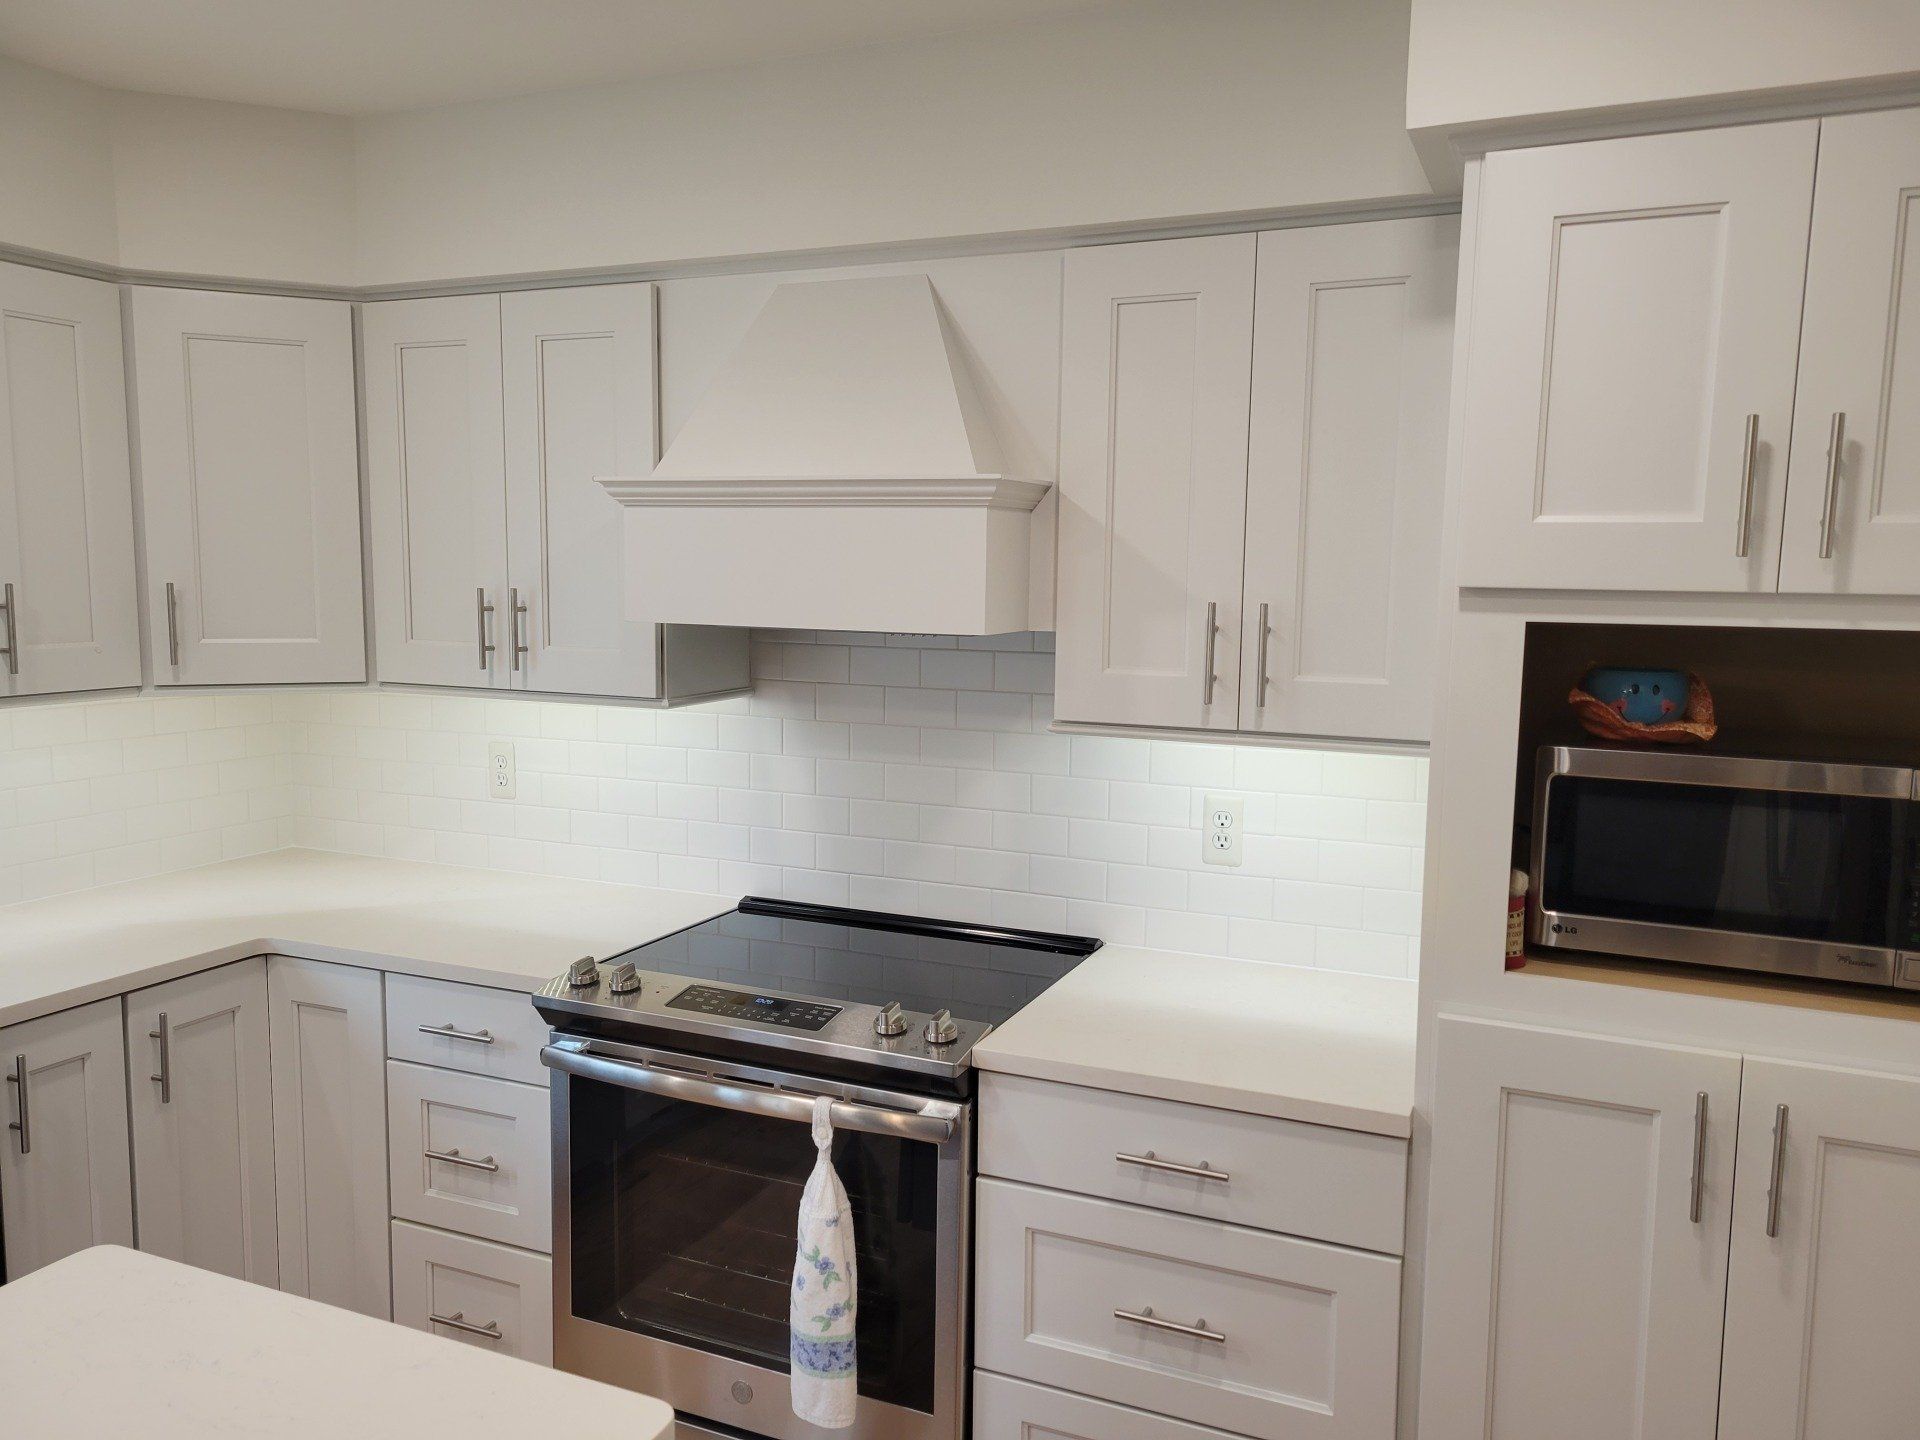 Professional Kitchen Remodel Contractor Near You